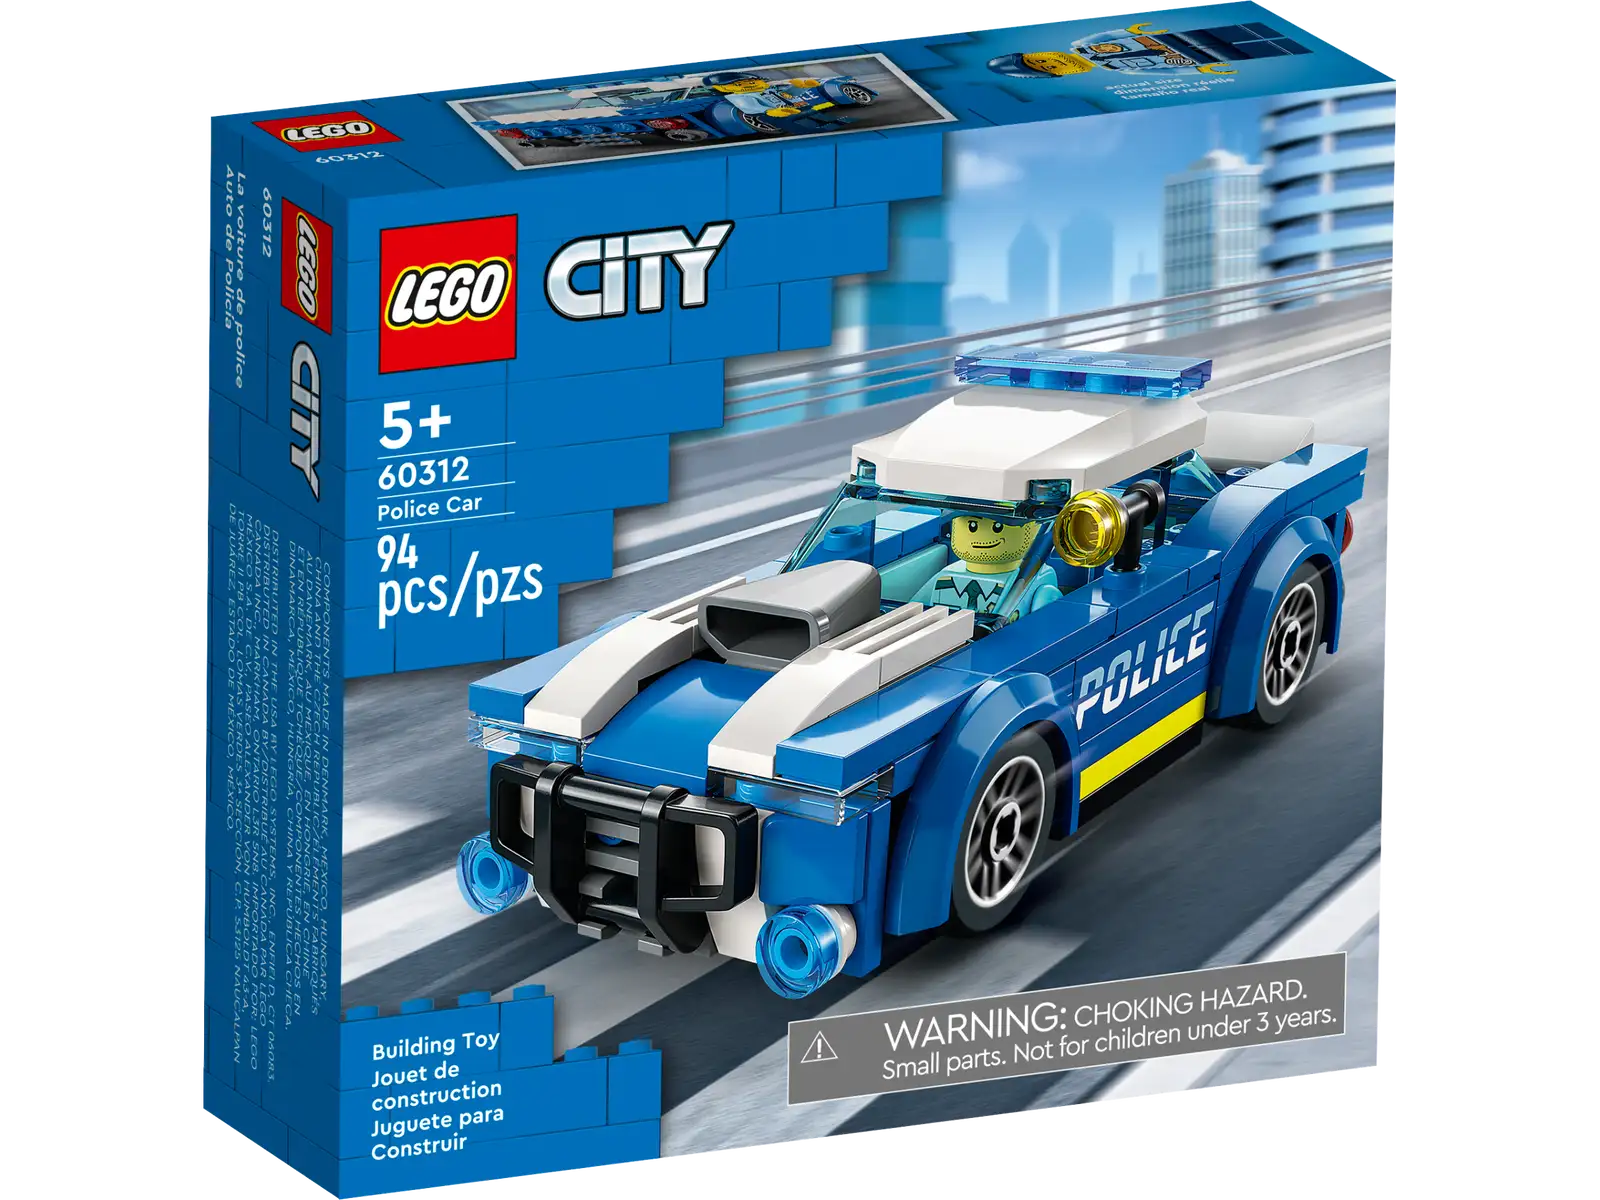 Introduce kids to a world of fun and excitement with this LEGO® City Police Car (60312) playset, featuring a sporty toy police patrol car with cool rims, wide fenders and ground-gripping tires. Just add the police officer minifigure, complete with a toy flashlight and police cap, for hours of imaginative crook-chasing action! LEGO building toy for kids aged 5 and up This set includes a step-by-step pictorial building guide and interactive digital building instructions. Available in the freeLEGO Building Instructions app for smartphones and tablets, the intuitive digital guide comes with amazing zoom and rotate tools that allow kids to visualize models from all angles as they build. Welcome to a world of imagination LEGO City Police playsets put kids at the heart of the action with cool toys that shift imaginative play up a gear. Children get to explore the world through play scenarios that depict real life in a fun and exciting way. Toy police car for kids aged 5 and up – Move creative play up a gear with this LEGO® City Police Car (60312) build-and-play set What’s in the box? – Everything kids need to build a toy police car with room behind the wheel for the included police officer minifigure Building toy for imaginative play – Kids get to explore the toy Police Car as they build, before popping the police officer behind the wheel and setting out on crook-chasing adventures A fun anytime gift – This LEGO® City Police Car toy can be given as a birthday, holiday or any-other-day gift for kids aged 5 and up Play on the go – When built, the toy Police Car measures over 1.5 in. (4 cm) high, 4.5 in. (11 cm) long and 2 in. (5 cm) wide. Perfect for play, wherever kids go Includes LEGO® minifigure accessories – This toy police car playset comes with a toy flashlight and police cap element for the included police officer minifigure Guidance for younger builders – This building set includes a printed pictorial building guide and digital building instructions, available in the LEGO® Building Instructions app Play that’s based on real life – LEGO® City playsets come with buildings, vehicles and characters that inspire imaginative role play based on real-life scenarios Quality assured – All LEGO® components meet stringent industry standards to ensure they are consistent, compatible and fun to build with: it’s been that way since 1958 Safety first – LEGO® components are dropped, heated, crushed, twisted and analyzed to make sure they meet strict global standards for safety